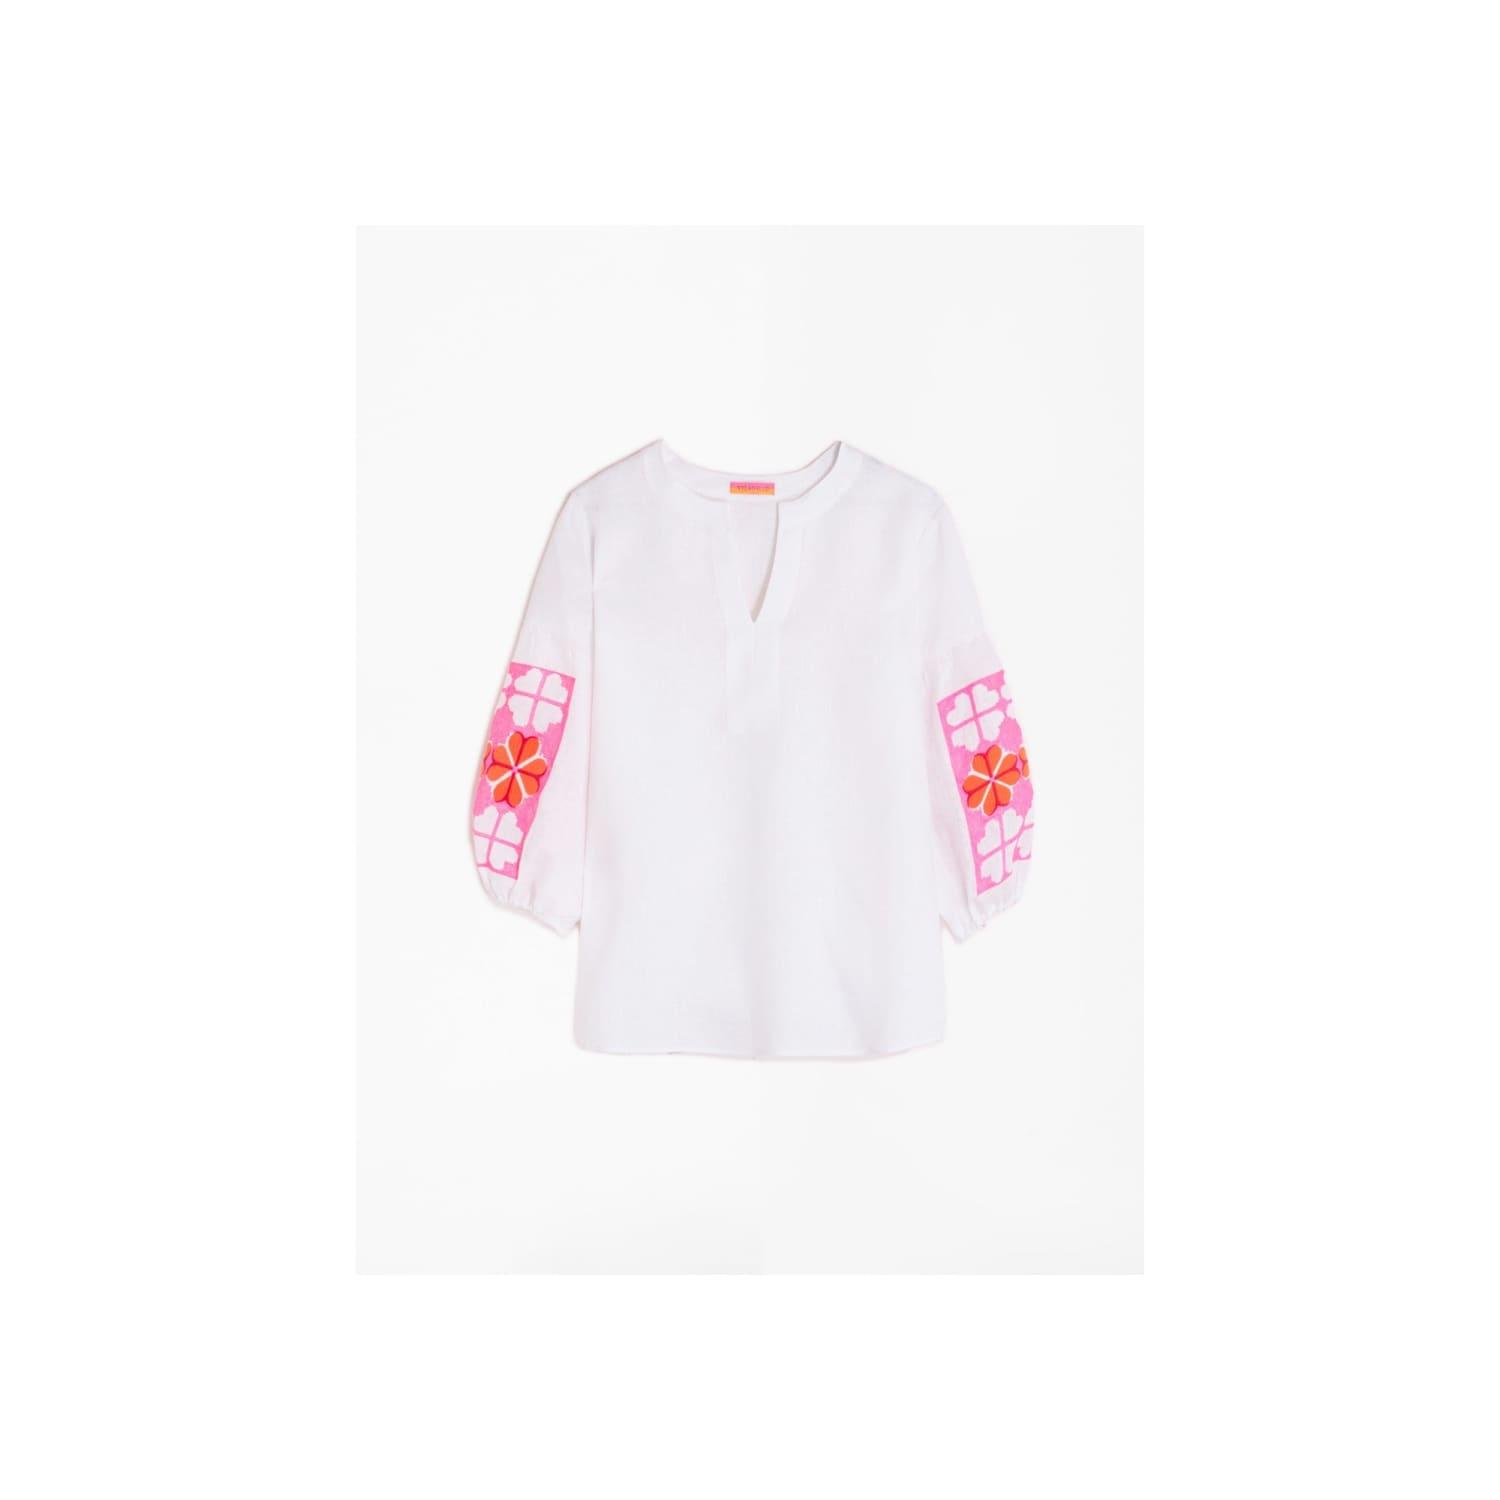 Oh El actual Problema Vilagallo Kaya Embroidered Shirt in Pink | Lyst